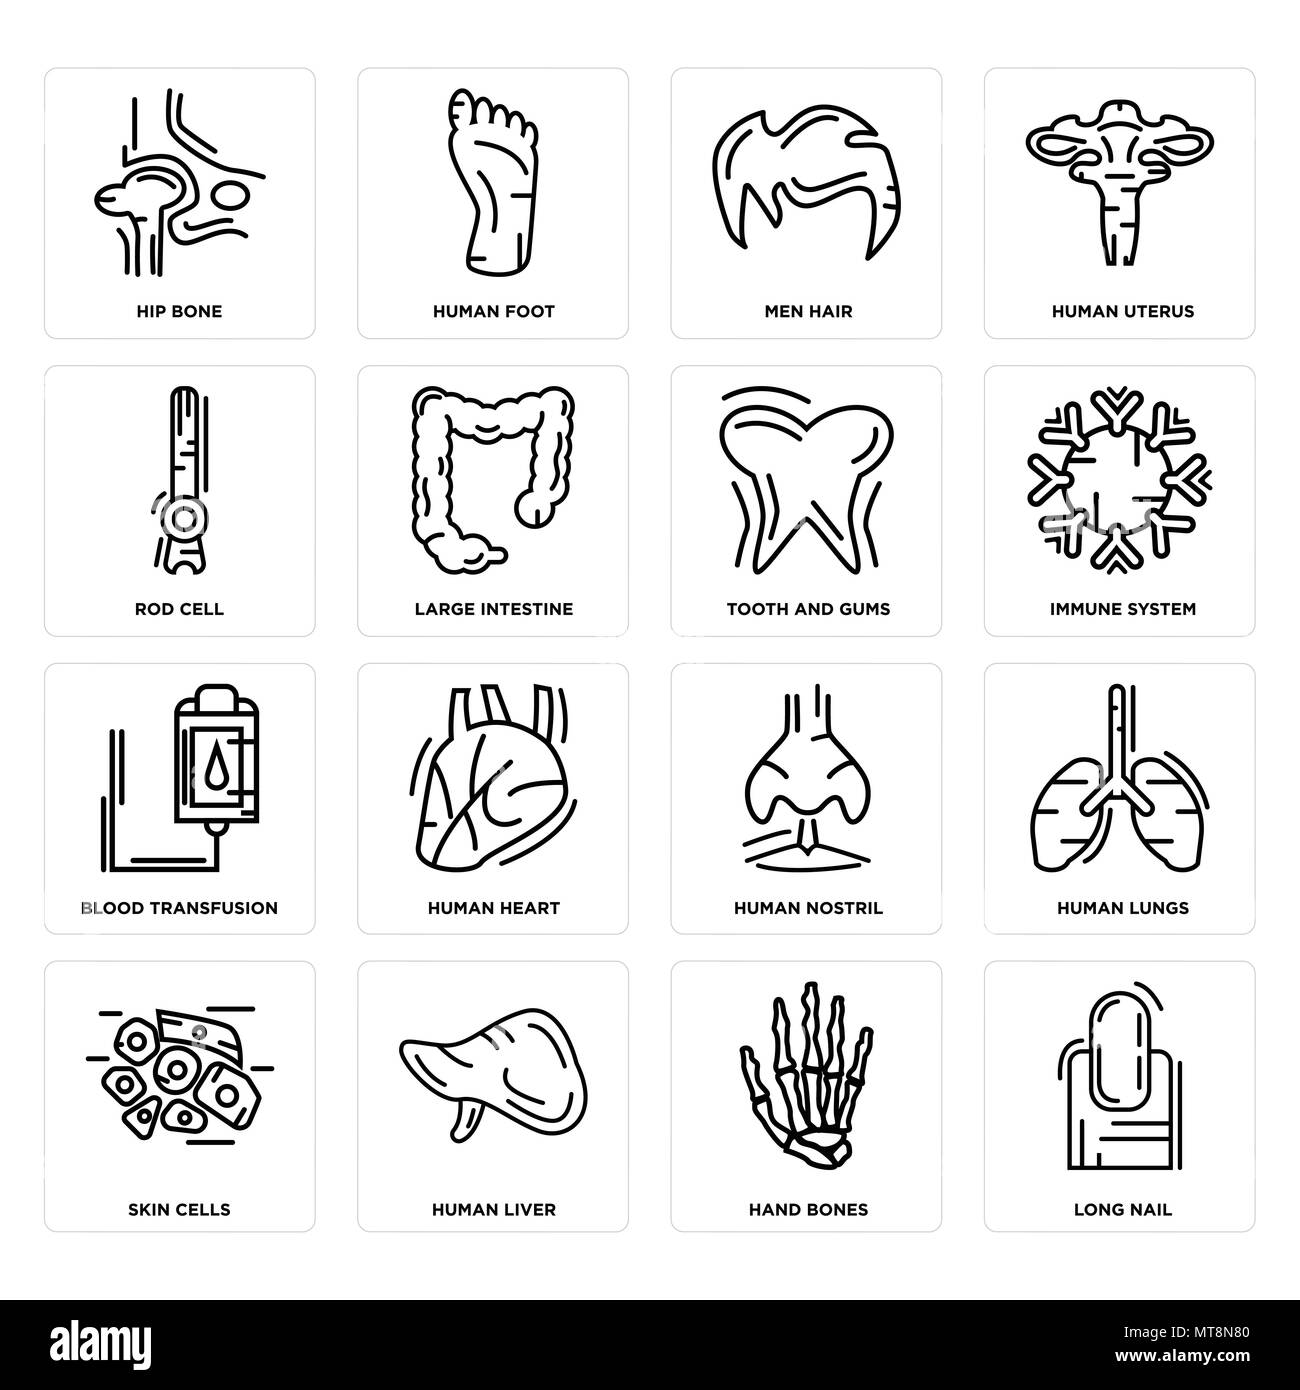 Set Of 16 simple editable icons such as Long Nail, Hand Bones, Human Liver, Skin Cells, Lungs, Hip Bone, Rod Cell, Blood Transfusion, Tooth and Gums c Stock Vector